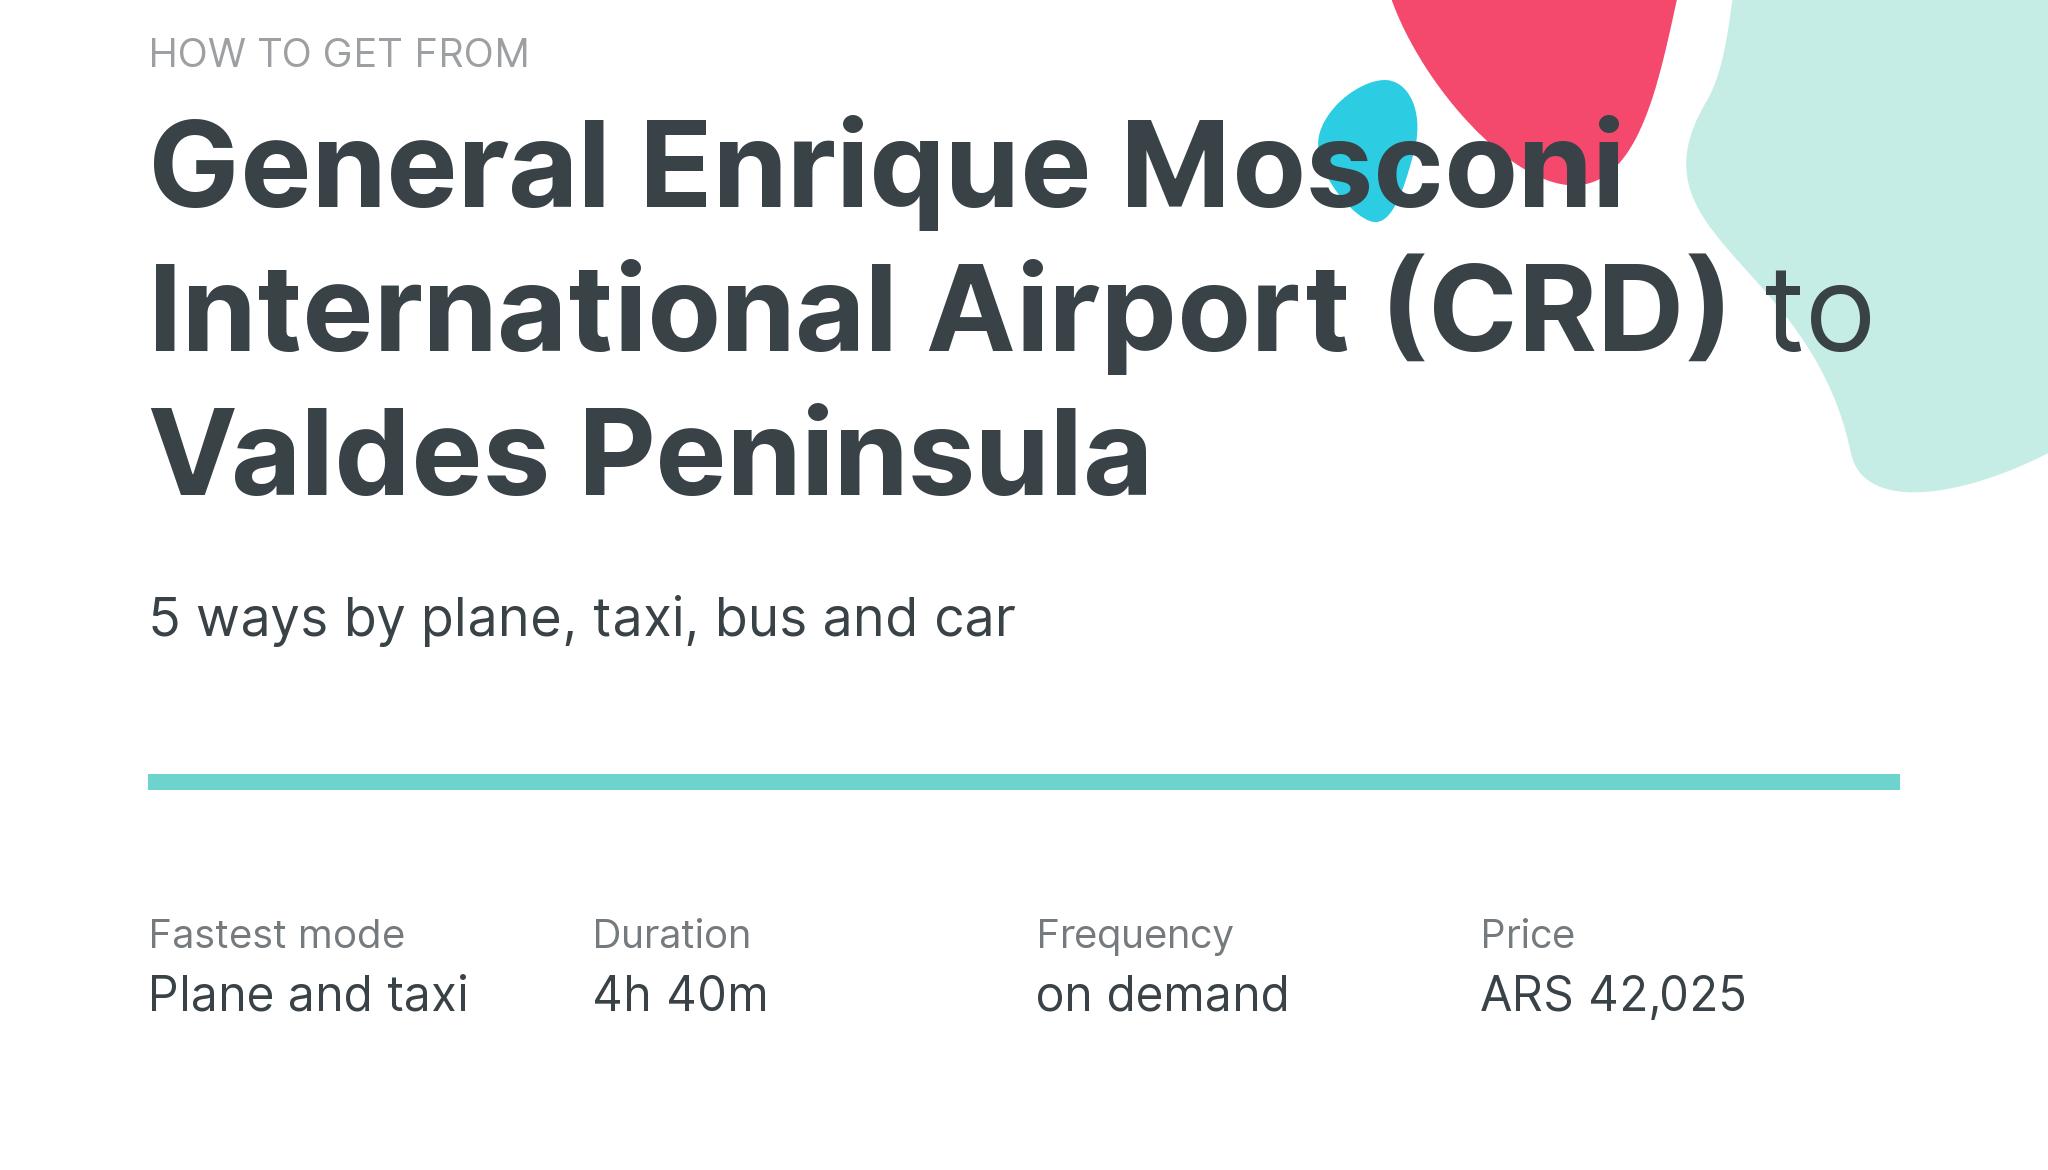 How do I get from General Enrique Mosconi International Airport (CRD) to Valdes Peninsula